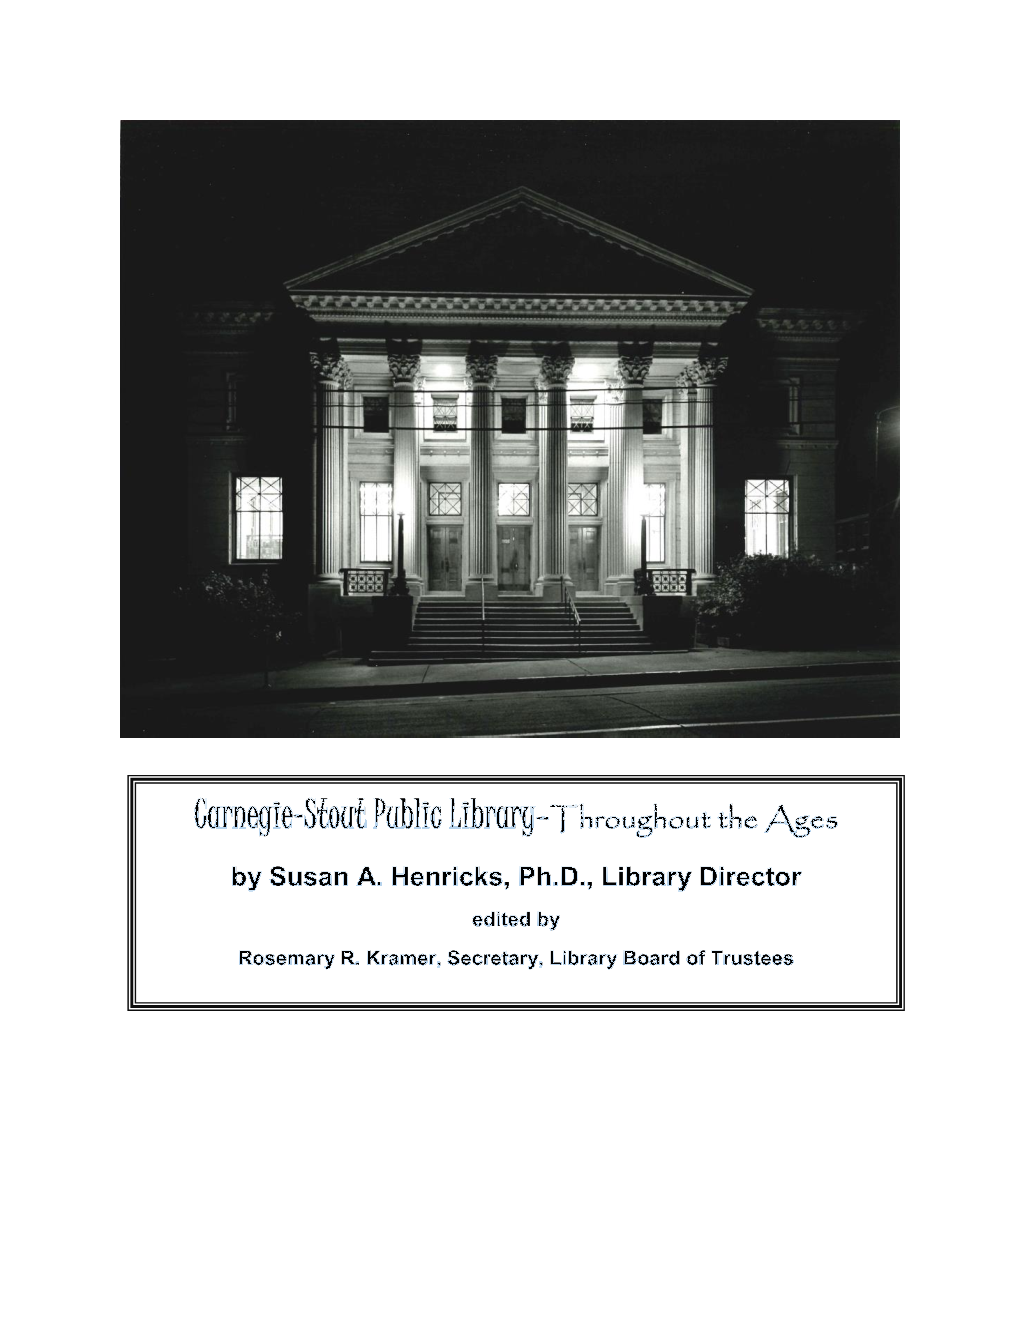 Carnegie-Stout Public Library – Throughout the Ages by Susan A